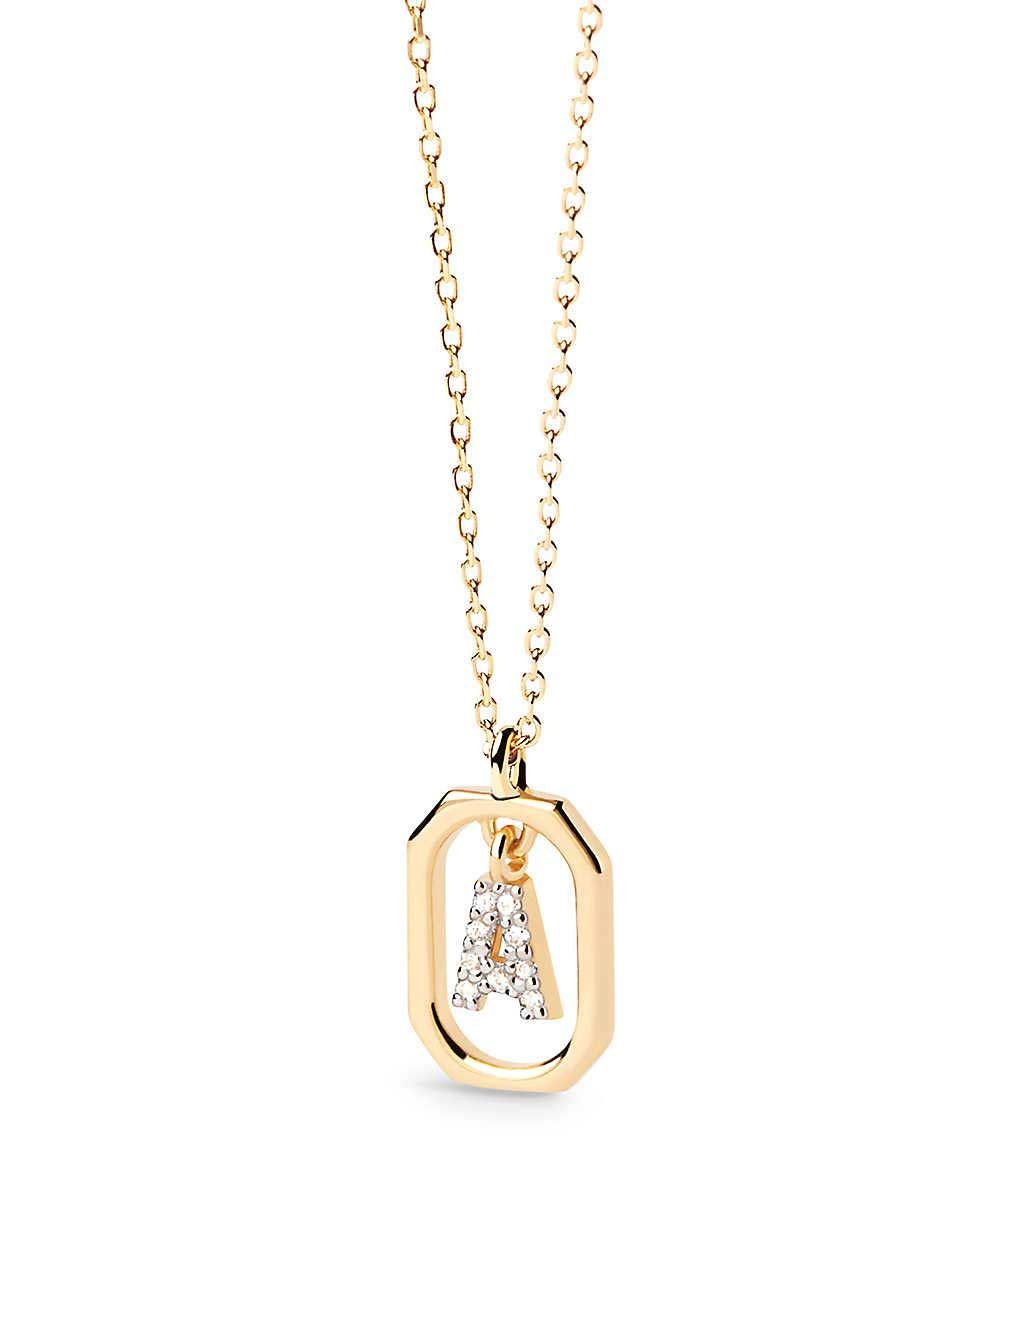 Win a Say it with Diamonds initial necklace worth £325 - Liverpool Echo